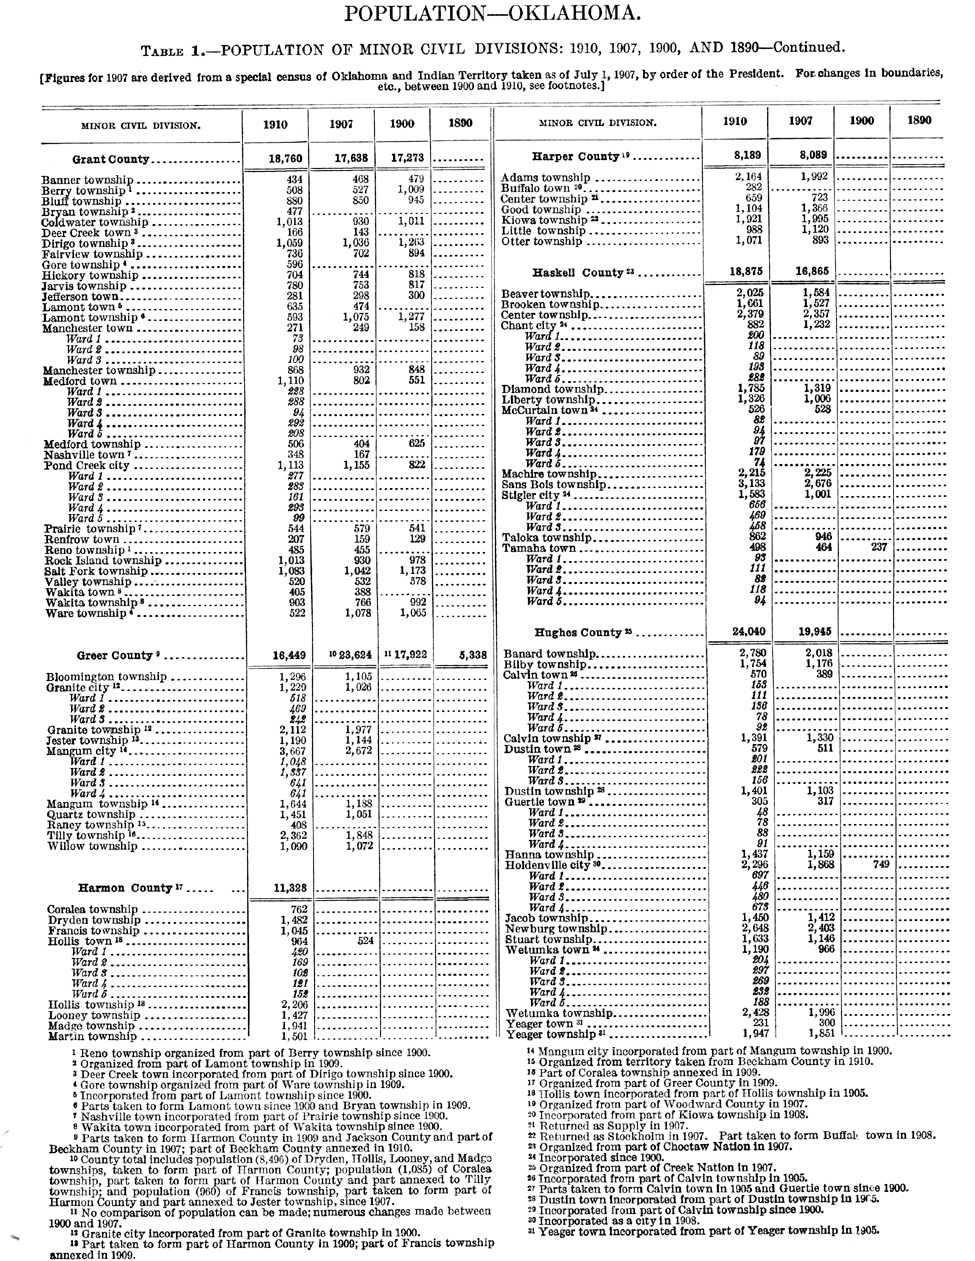 1910 Oklahoma Census, Chapter 1, Table 1, Page 6